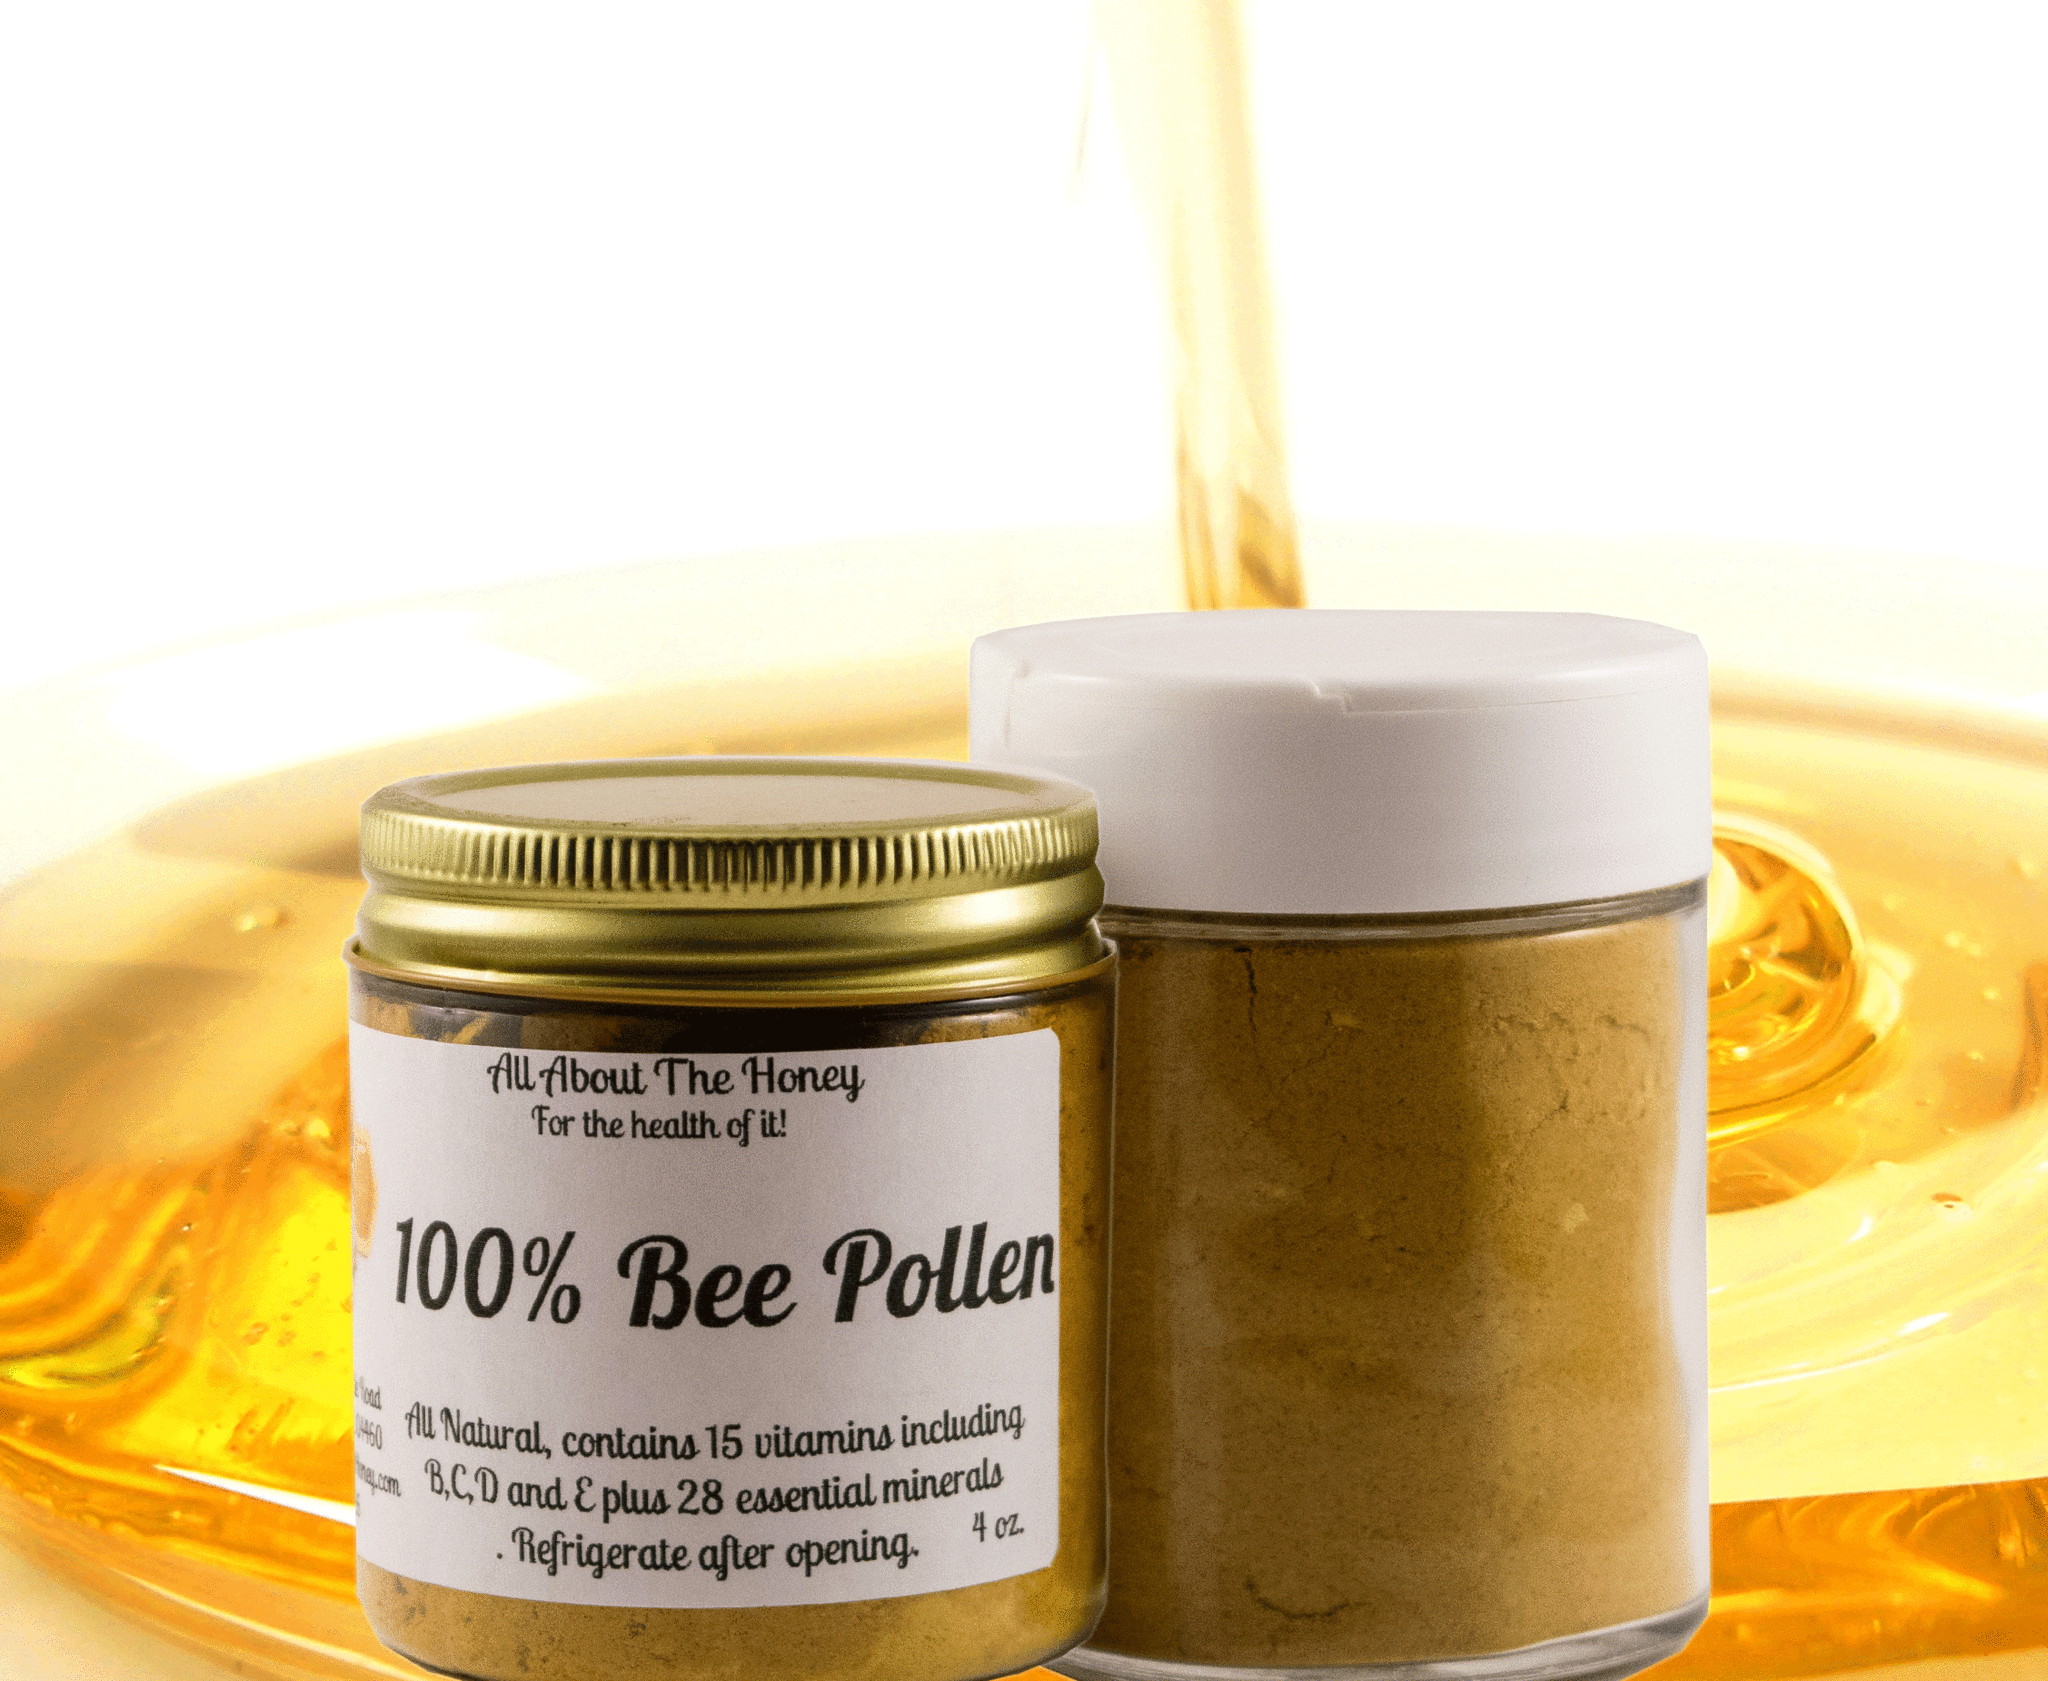 Buy Bee Pollen Powder Online - All About The Honey